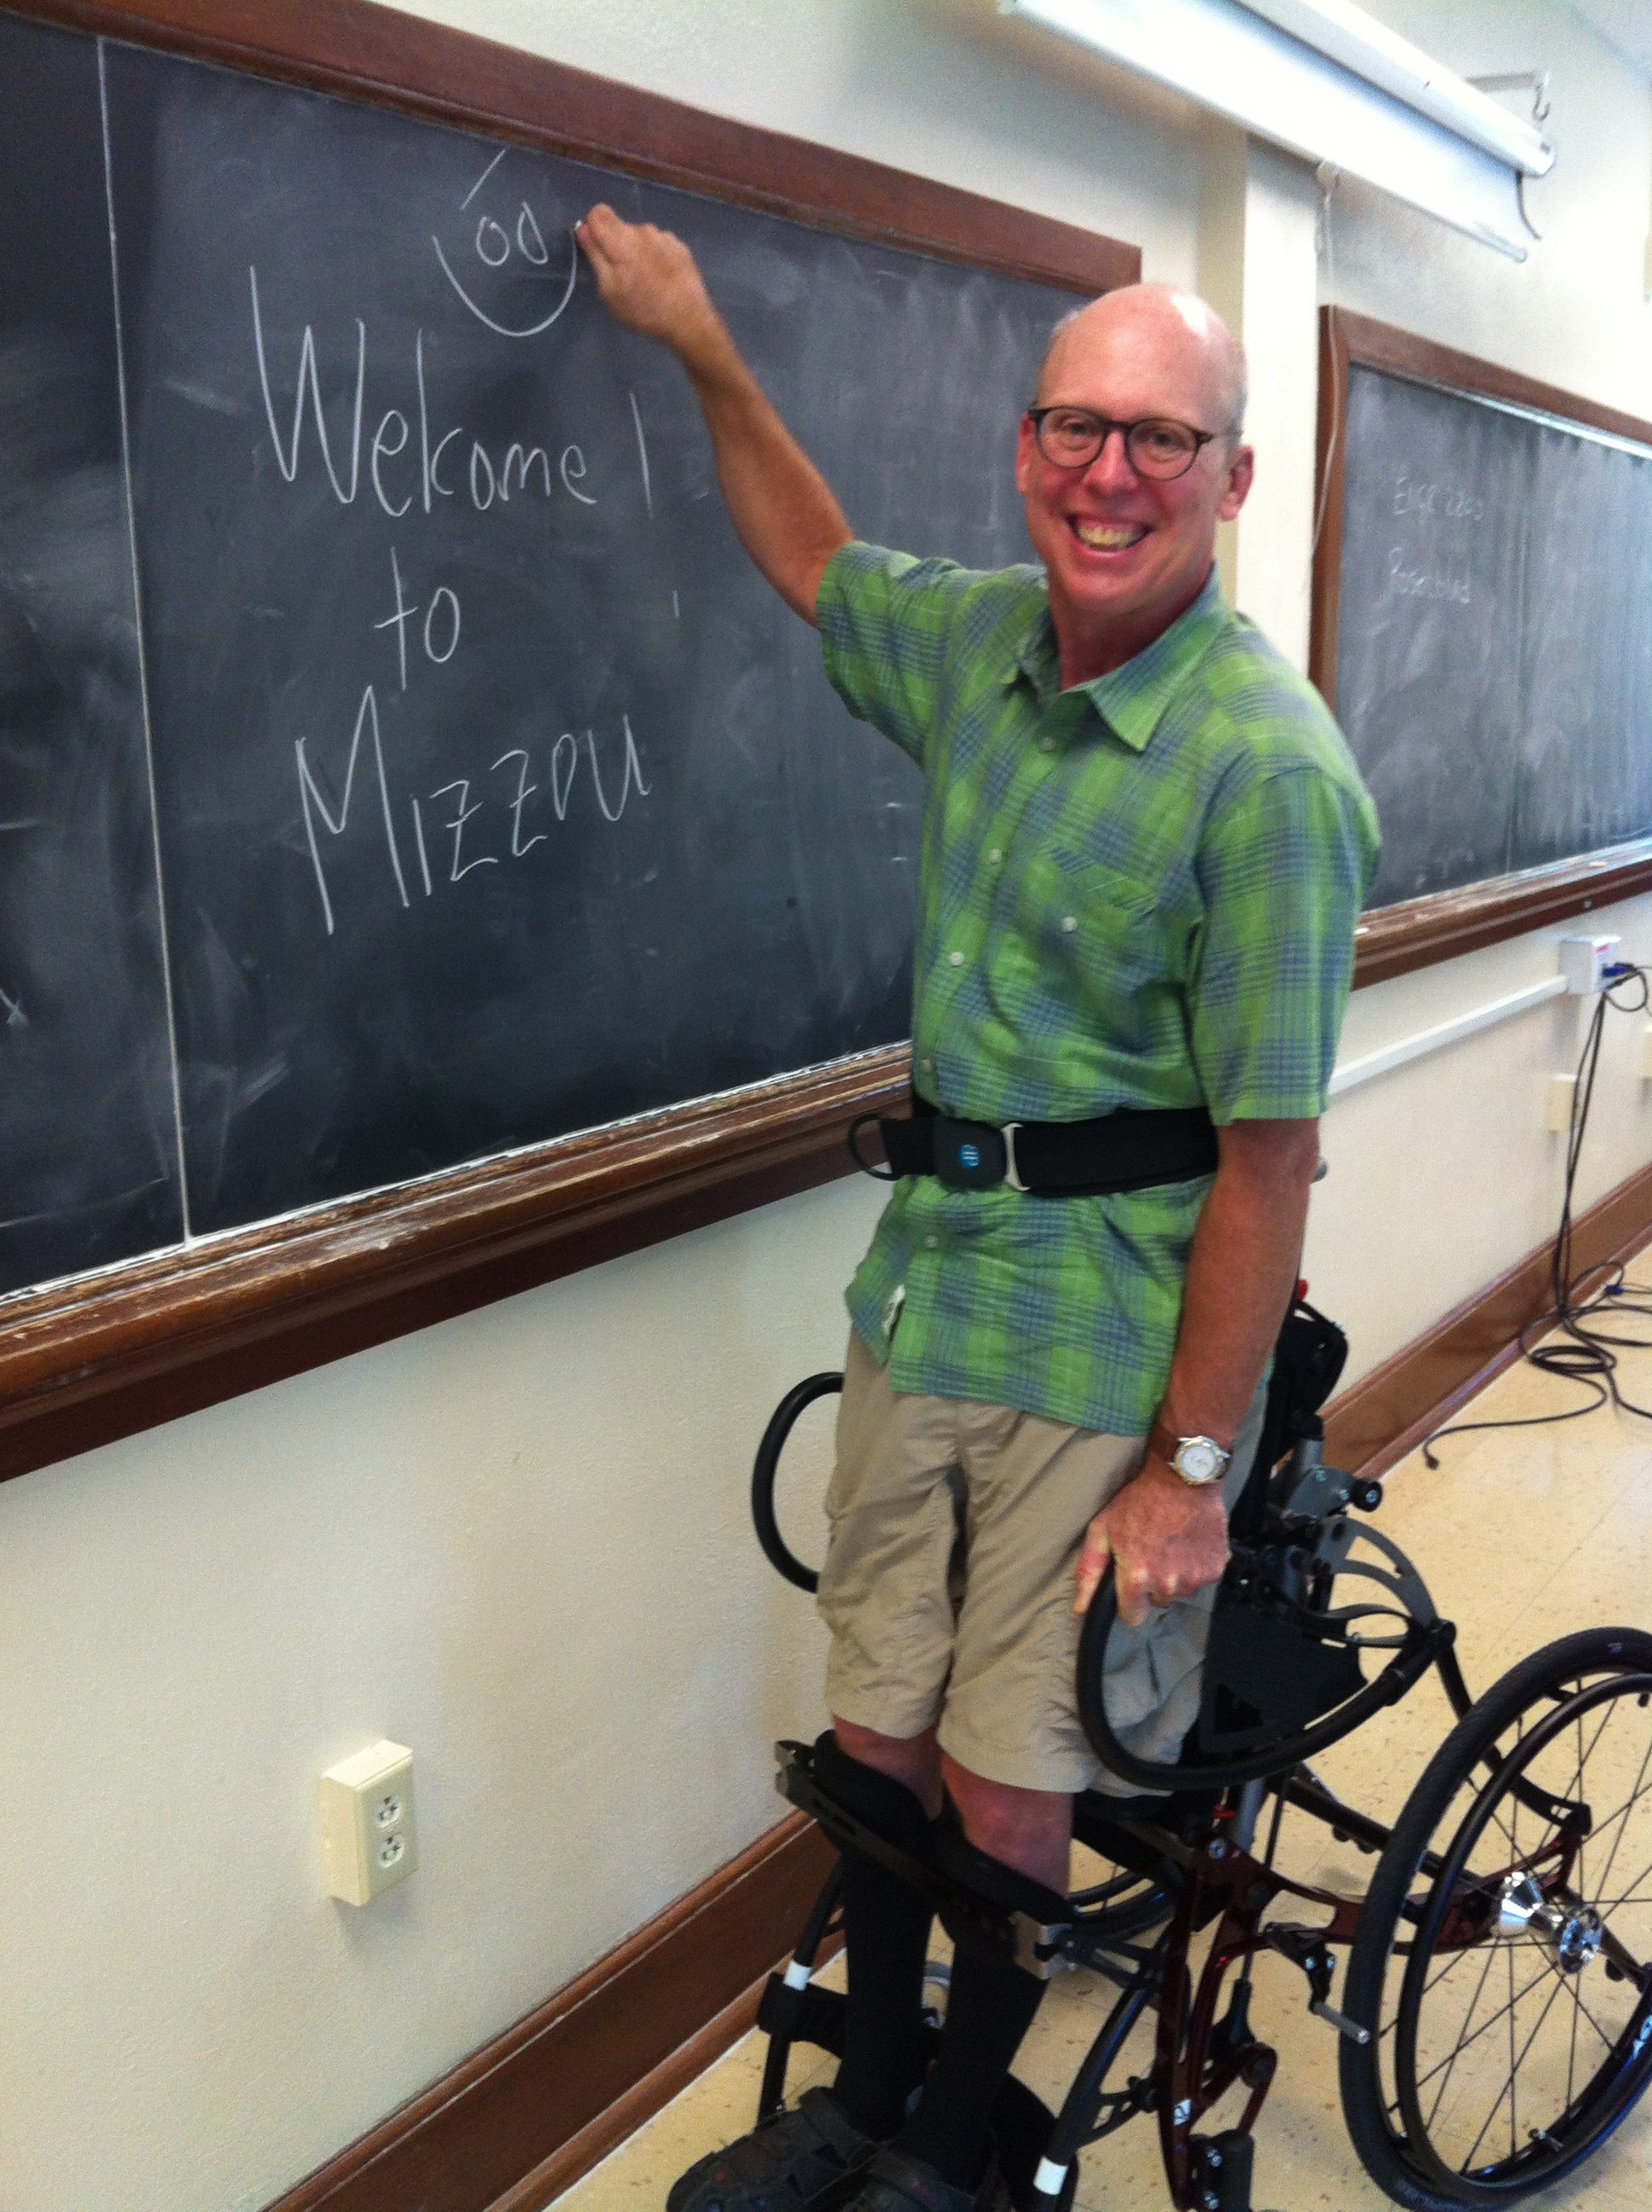 Professor using accessible device stands at the front of the classroom